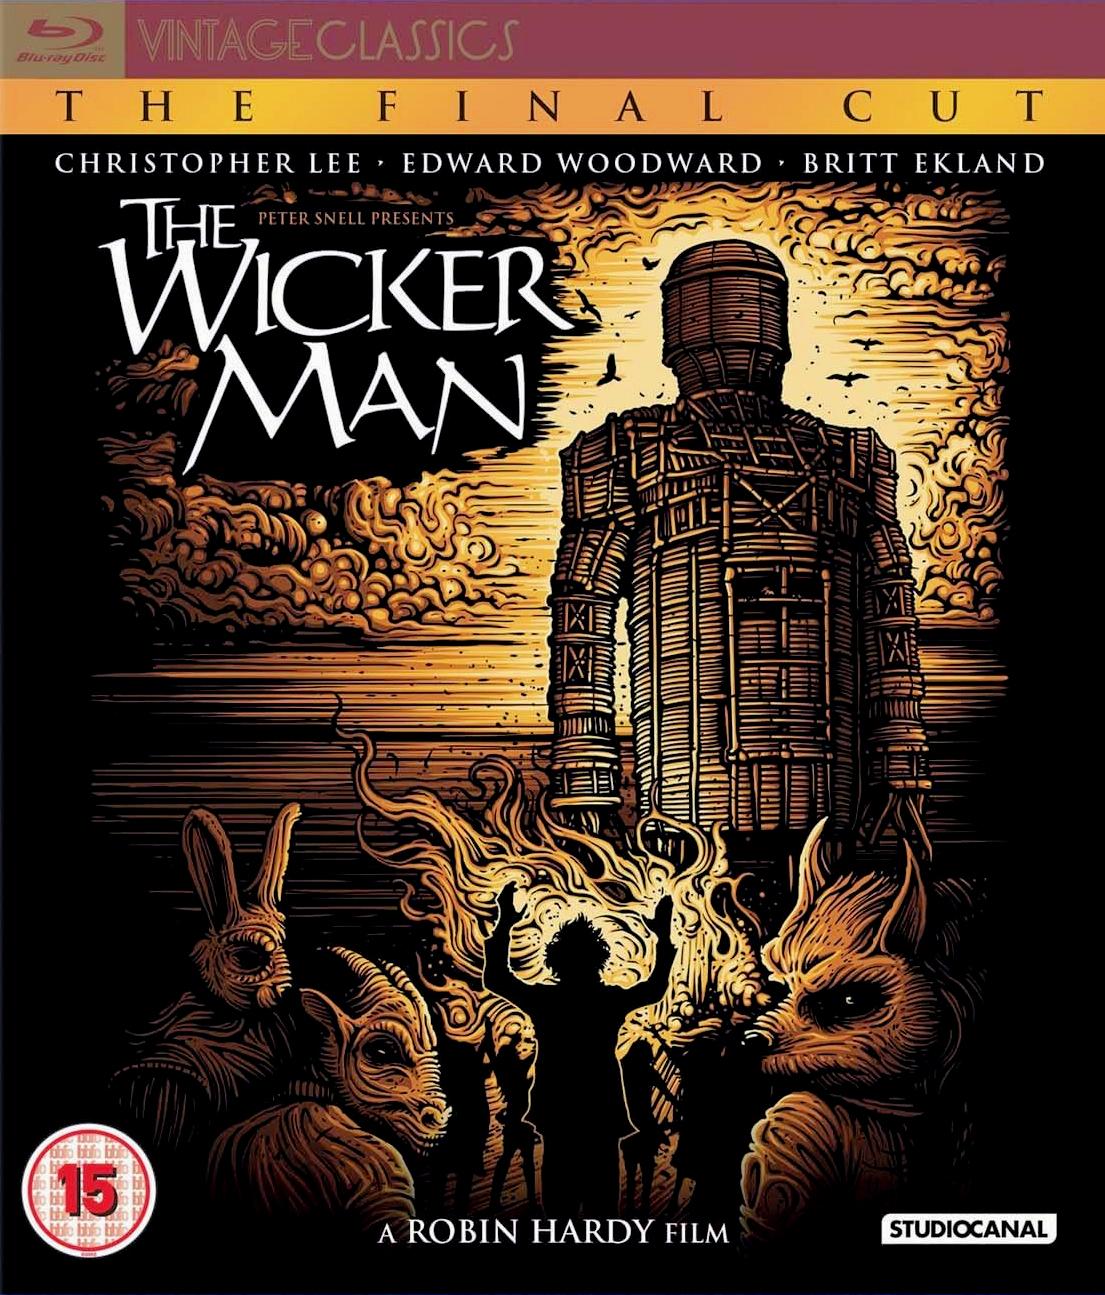 The Wicker Man (1973) Blu-ray cover from Studiocanal [2013] (1)